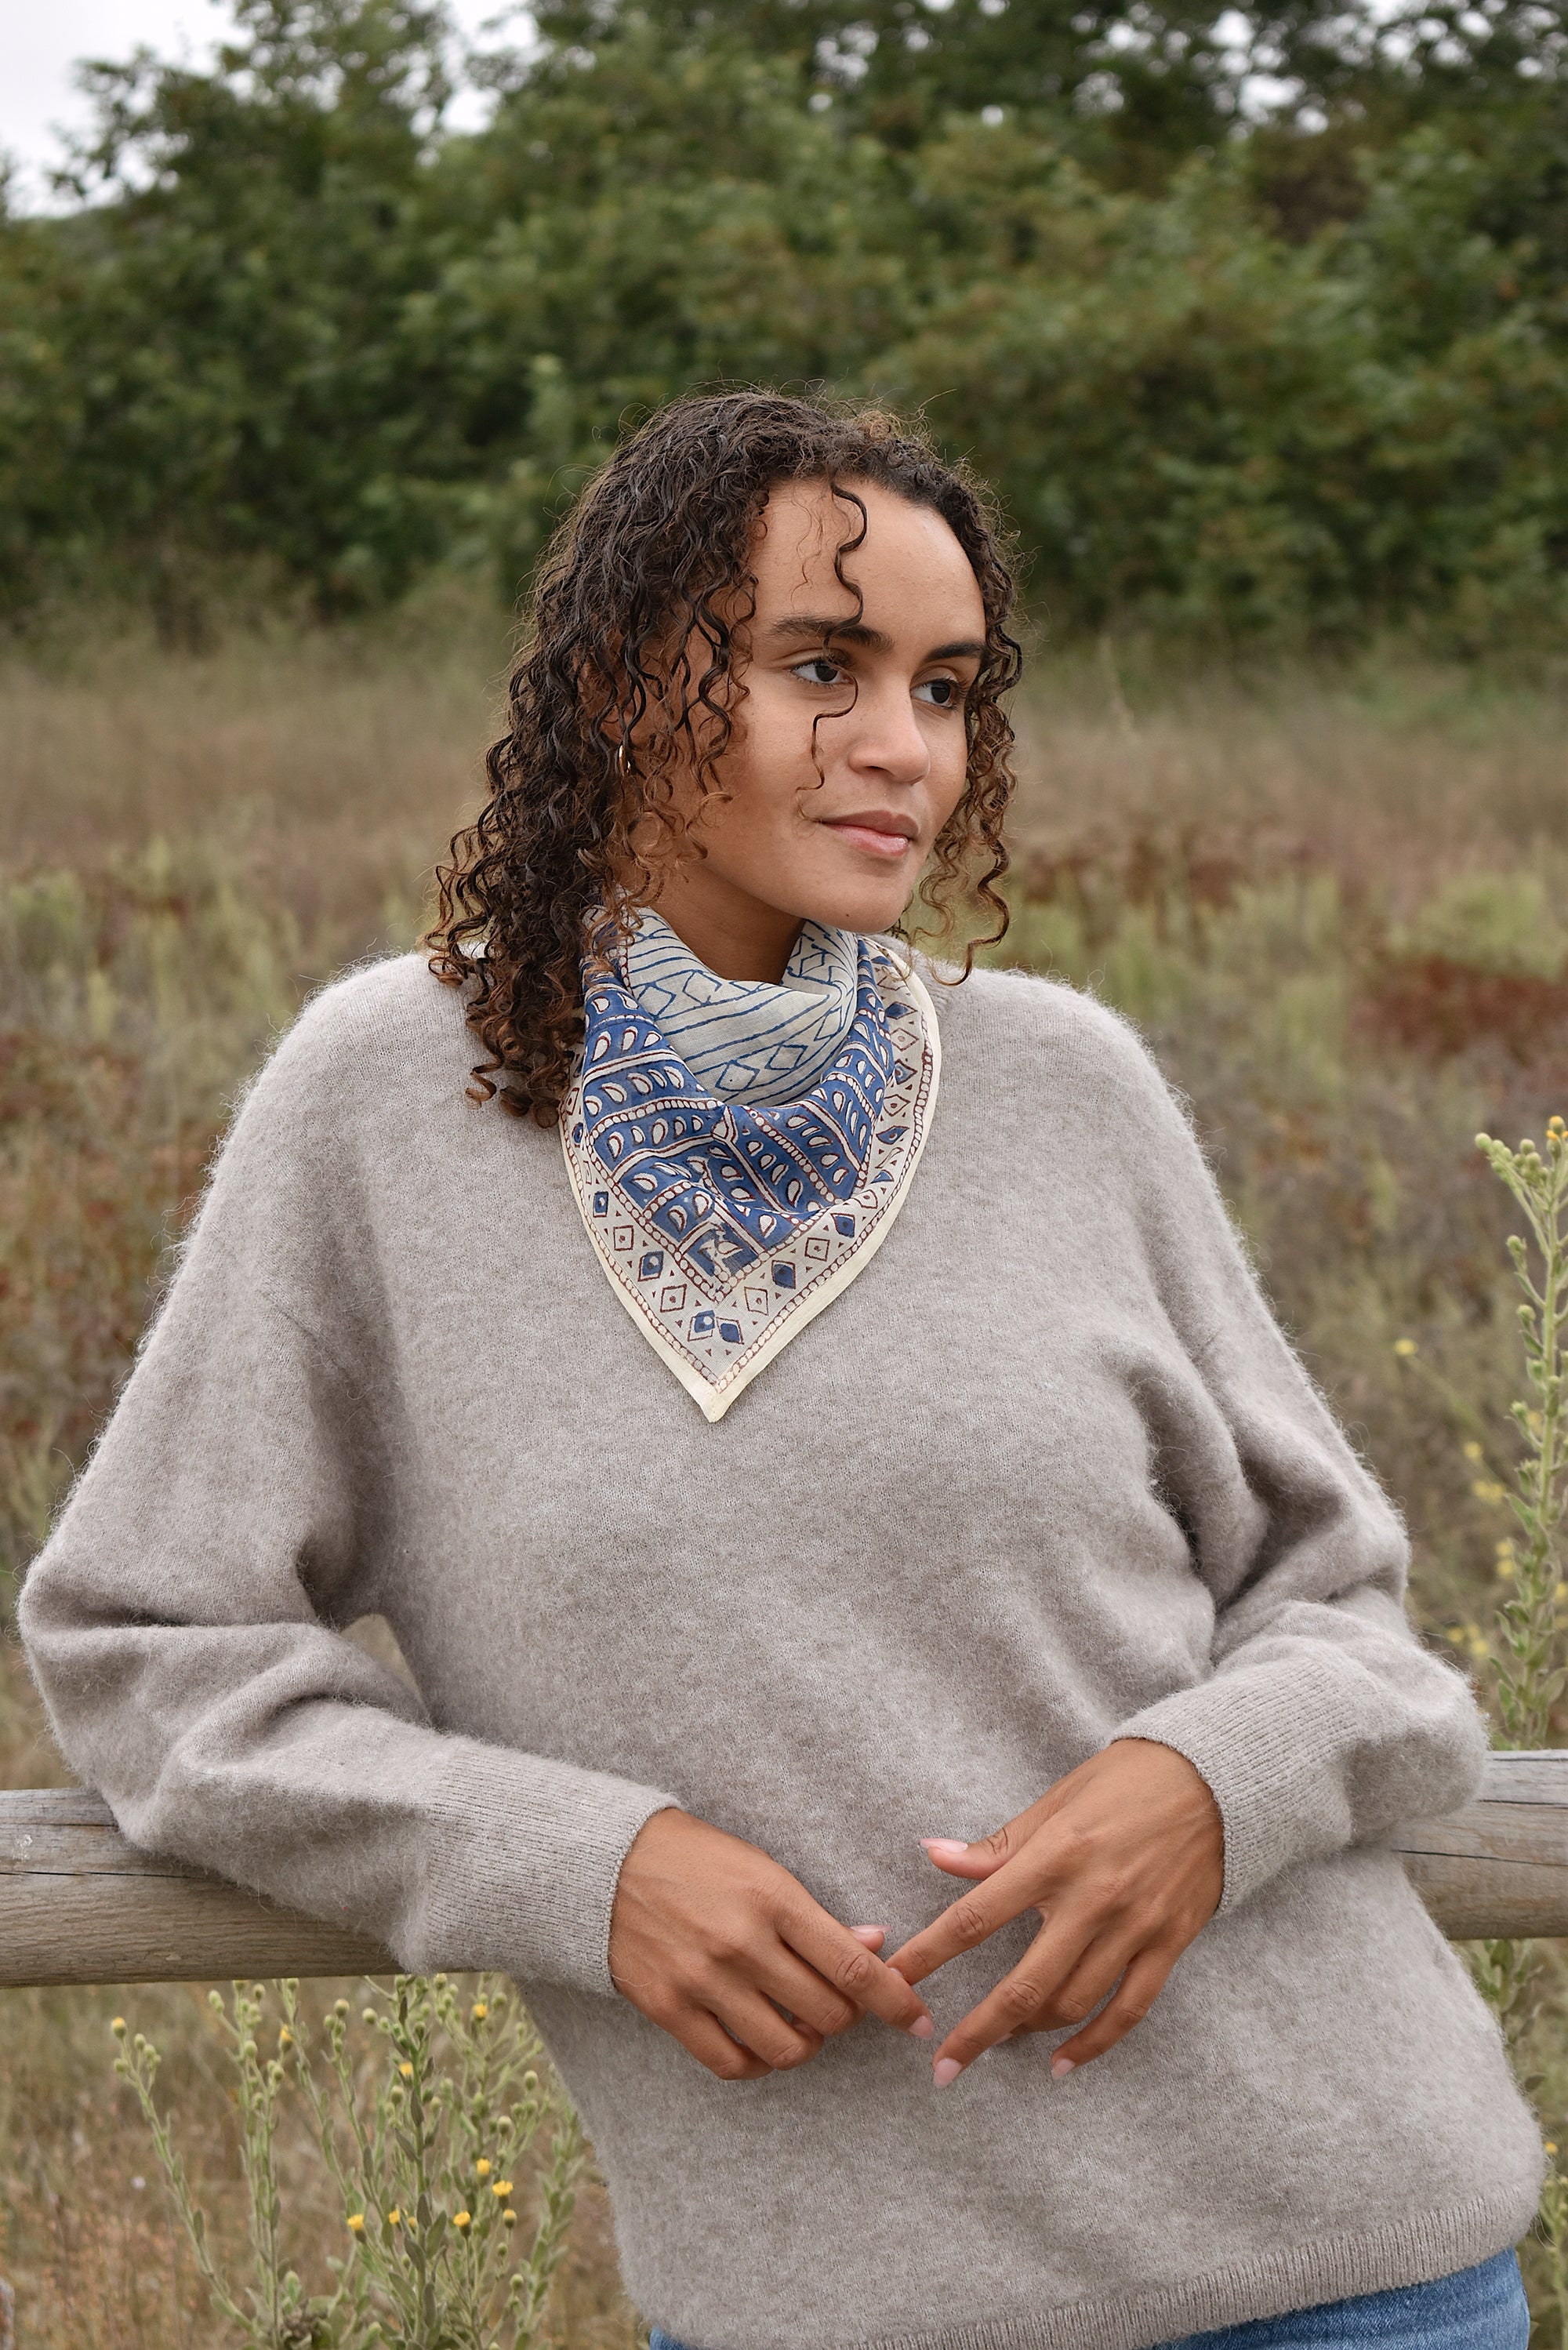 Model wearing Helene bandana tied around neck, tied in the back. Paired with tan sweater and blue jeans. Model leaning against a fence, outside near trees.